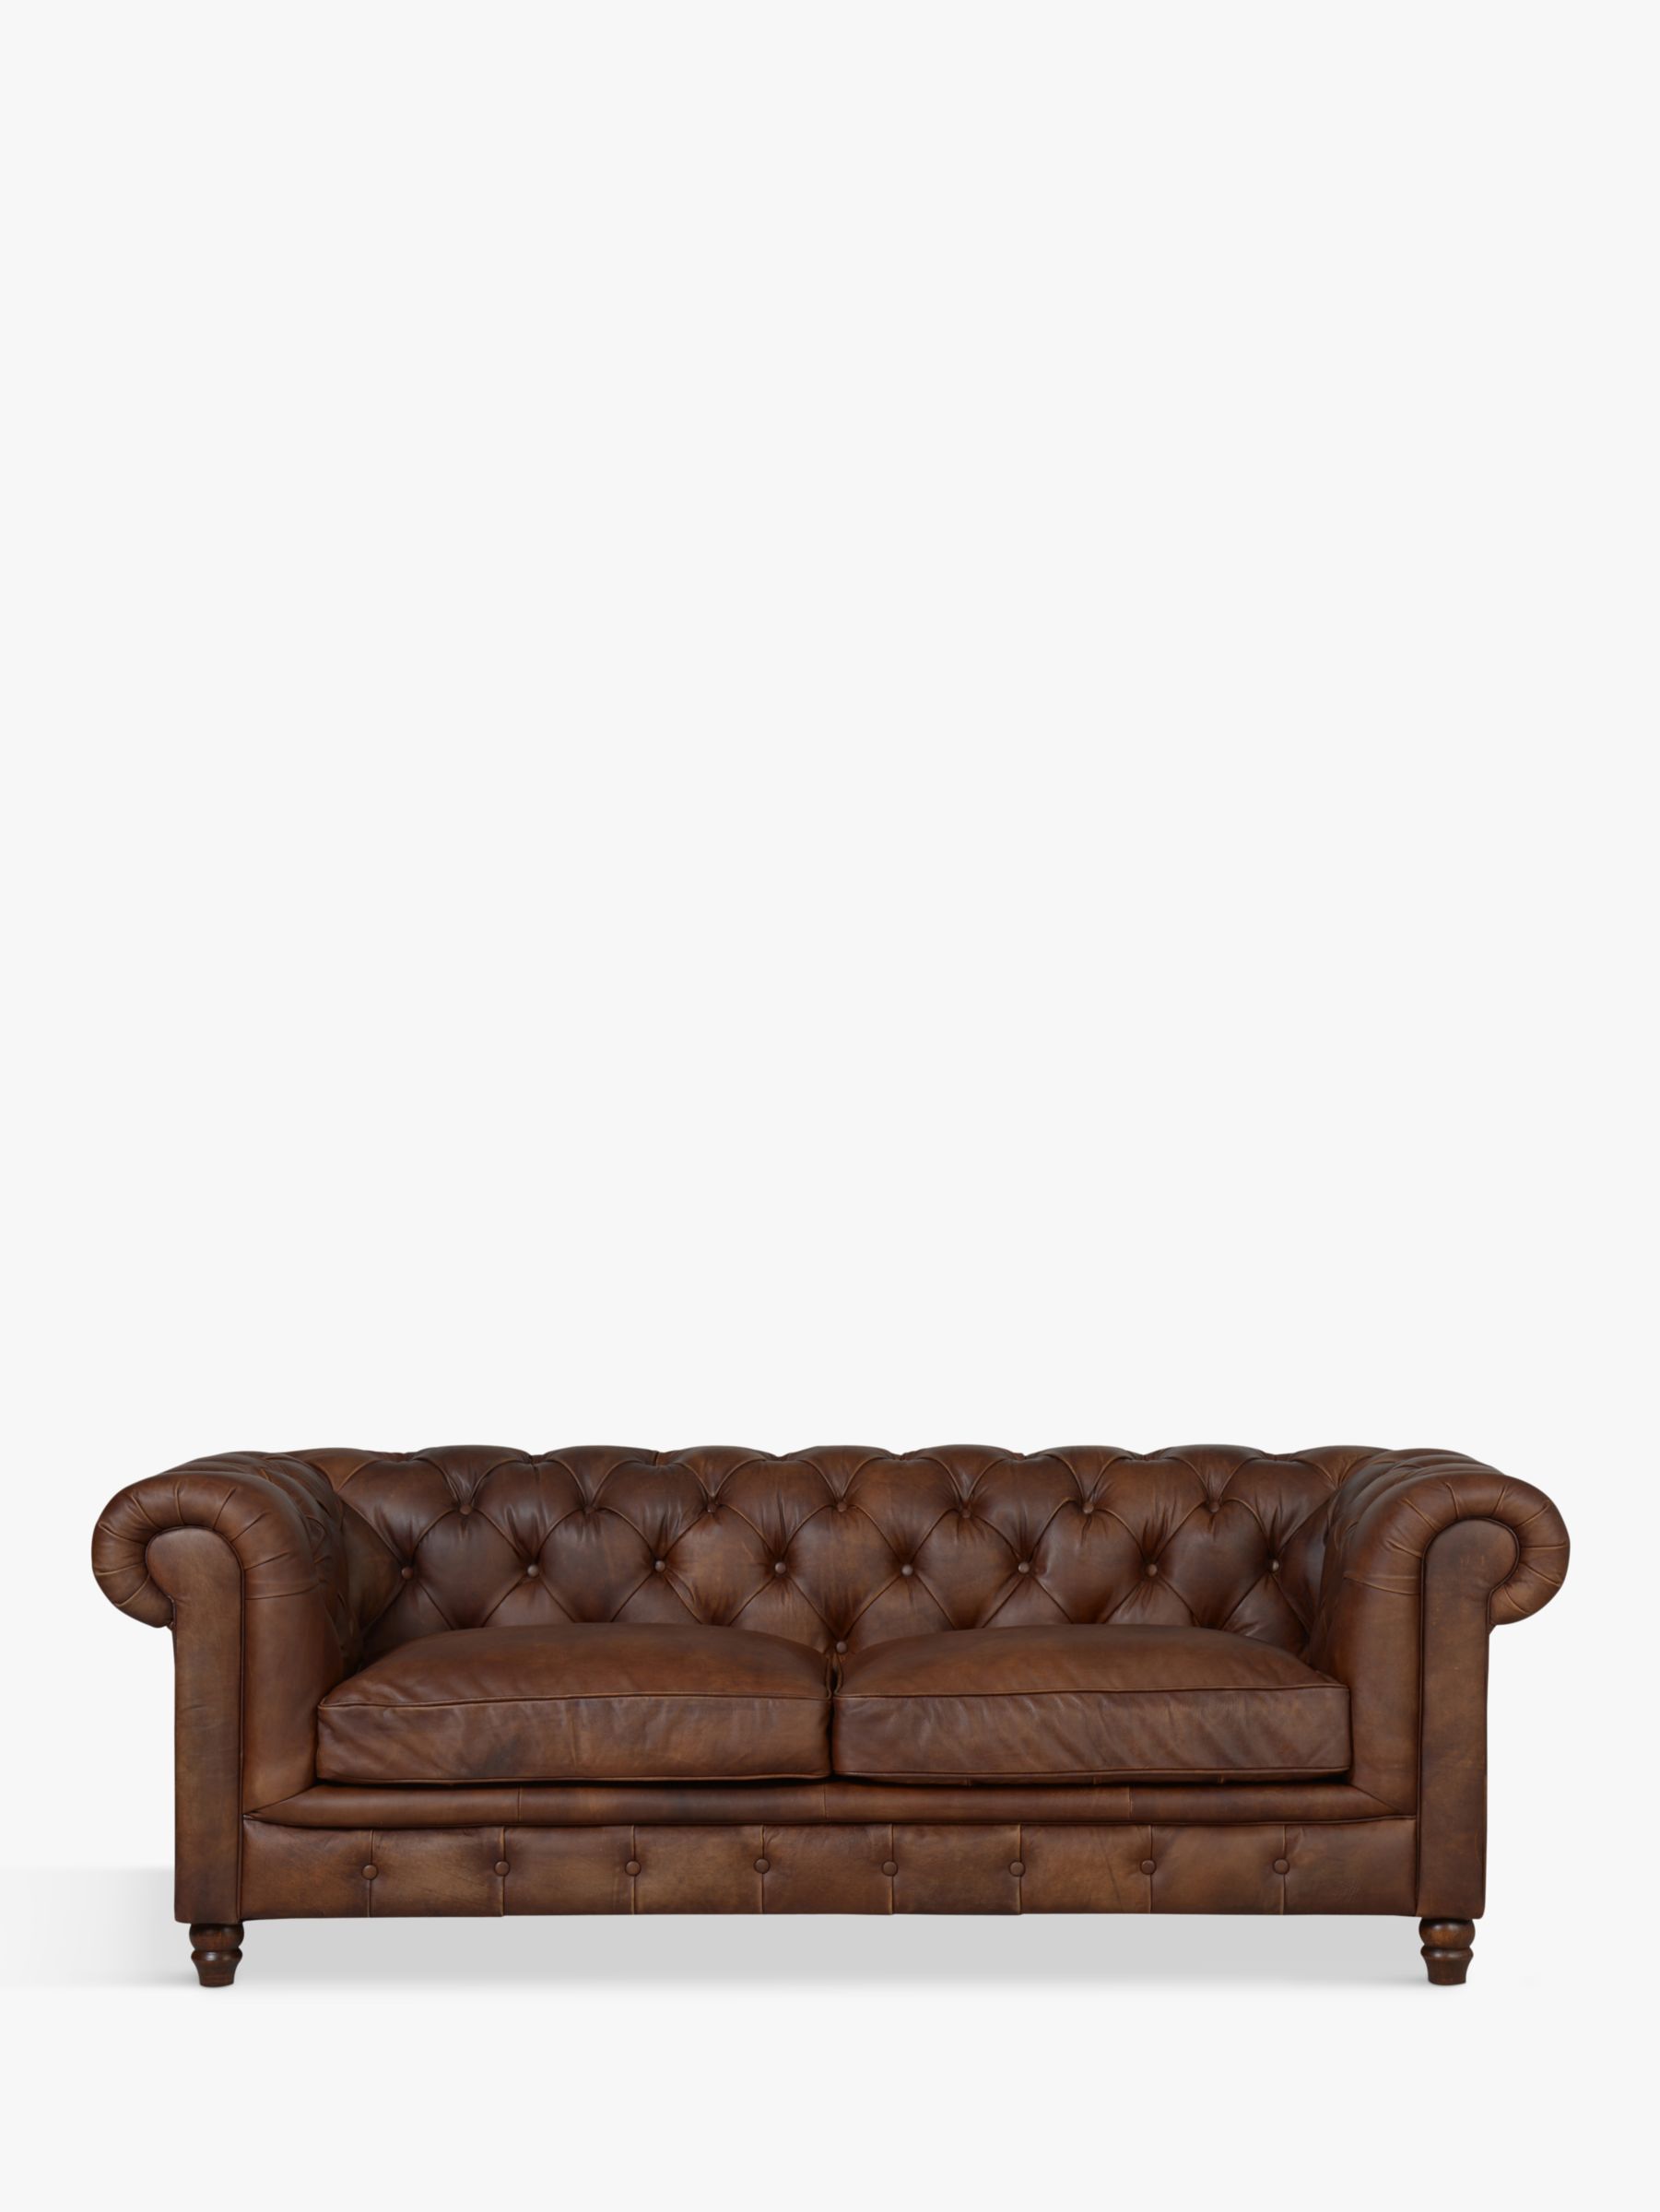 Earle Range, Halo Earle Chesterfield Large 3 Seater Leather Sofa